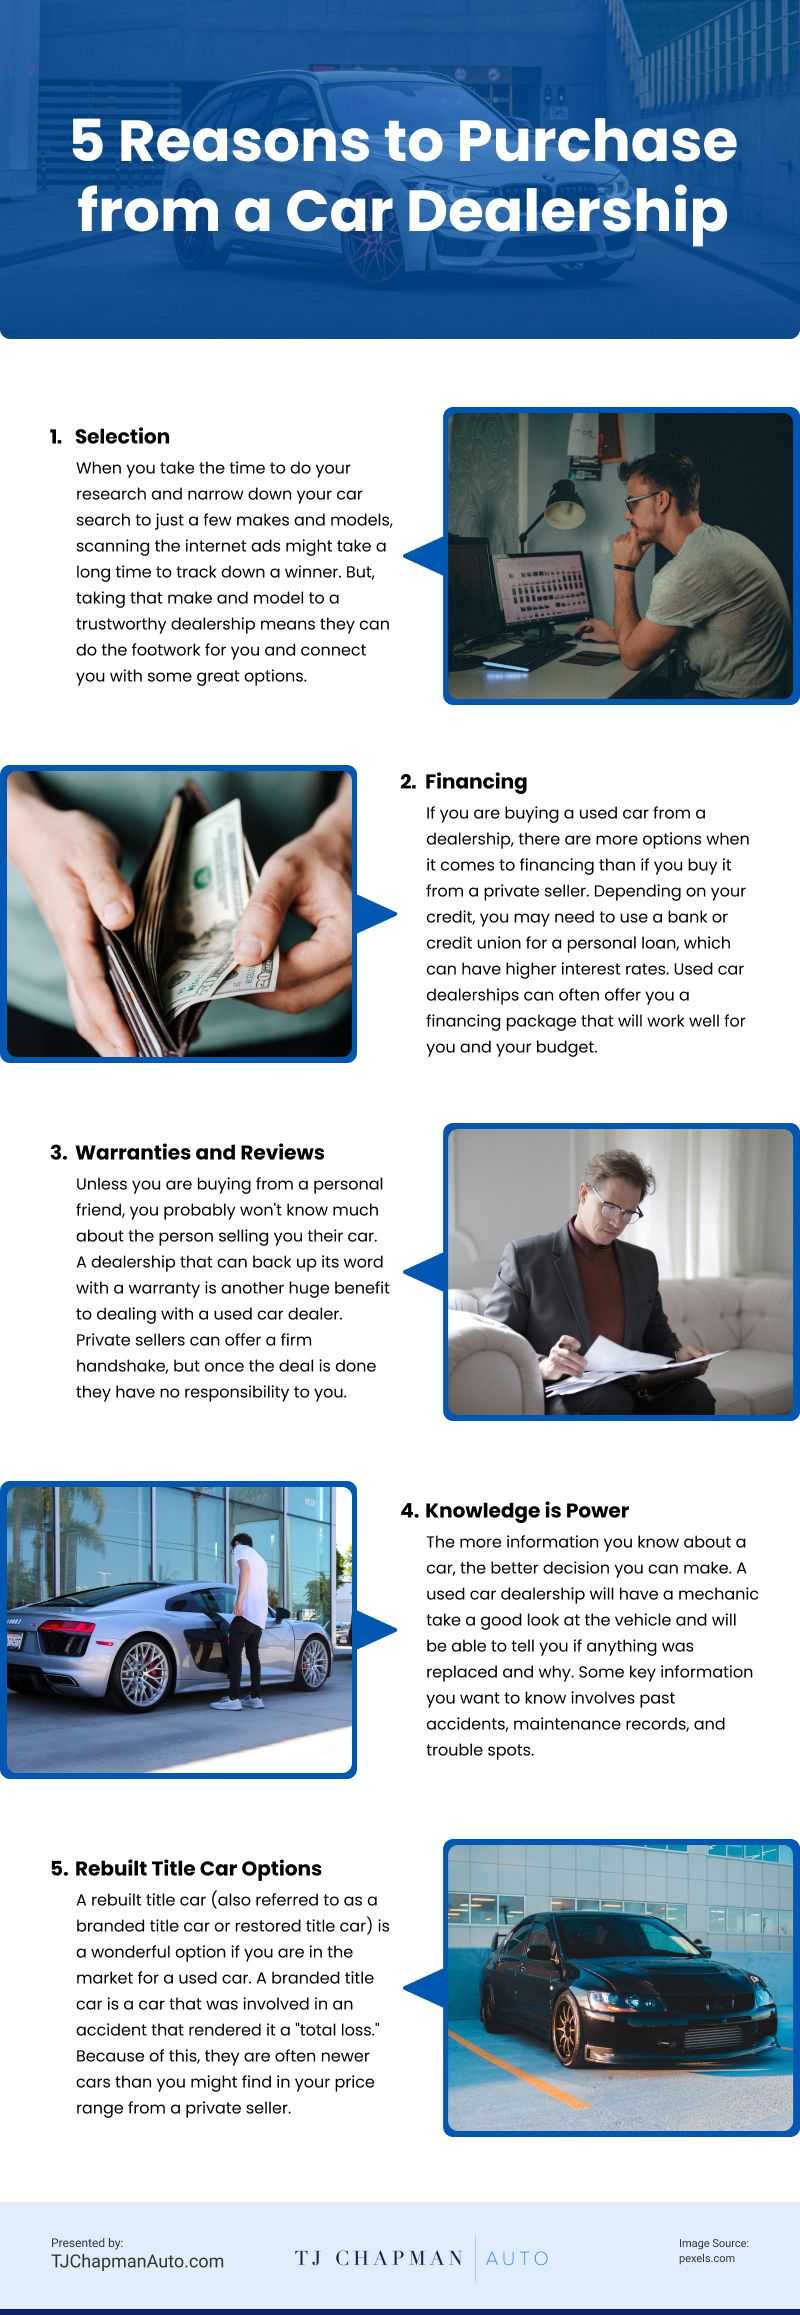 5 Reasons to Purchase from a Car Dealership Infographic